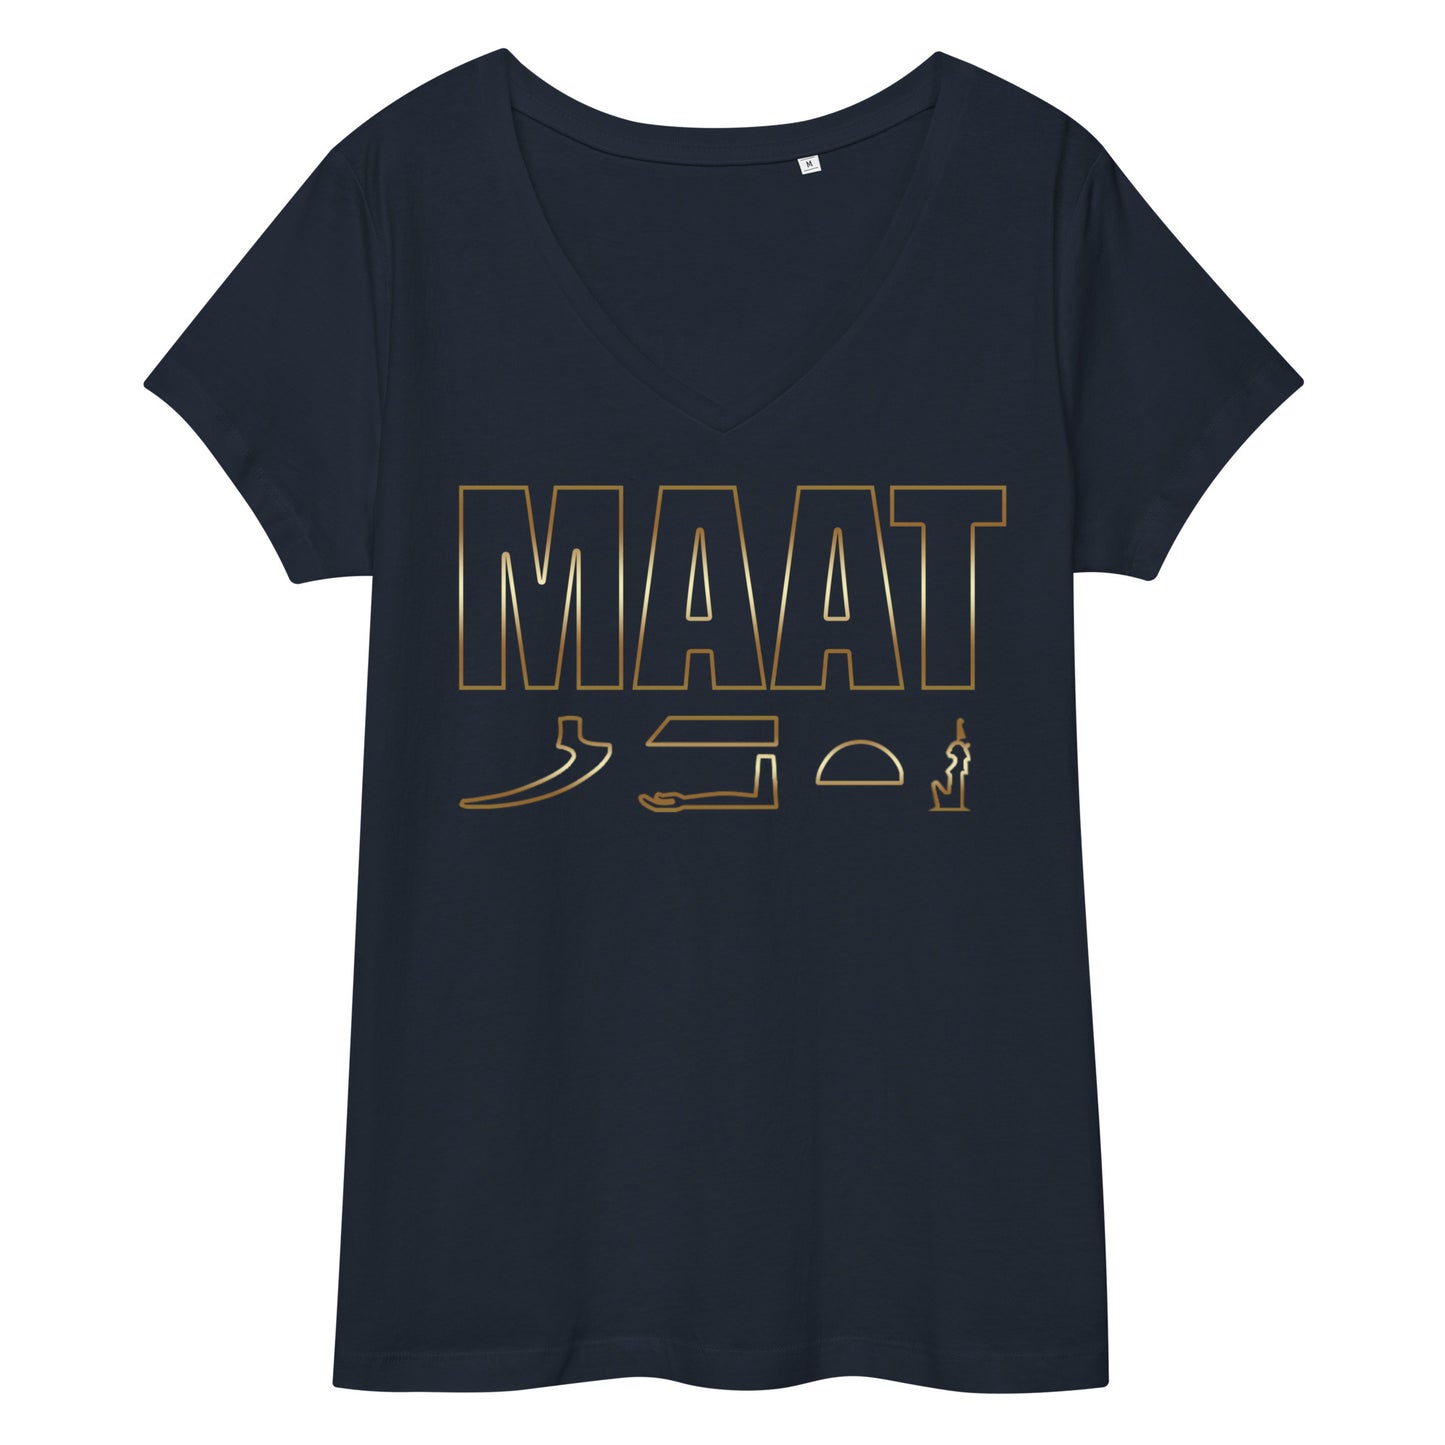 MAAT FOREVER Women’s fitted v-neck t-shirt MAAT